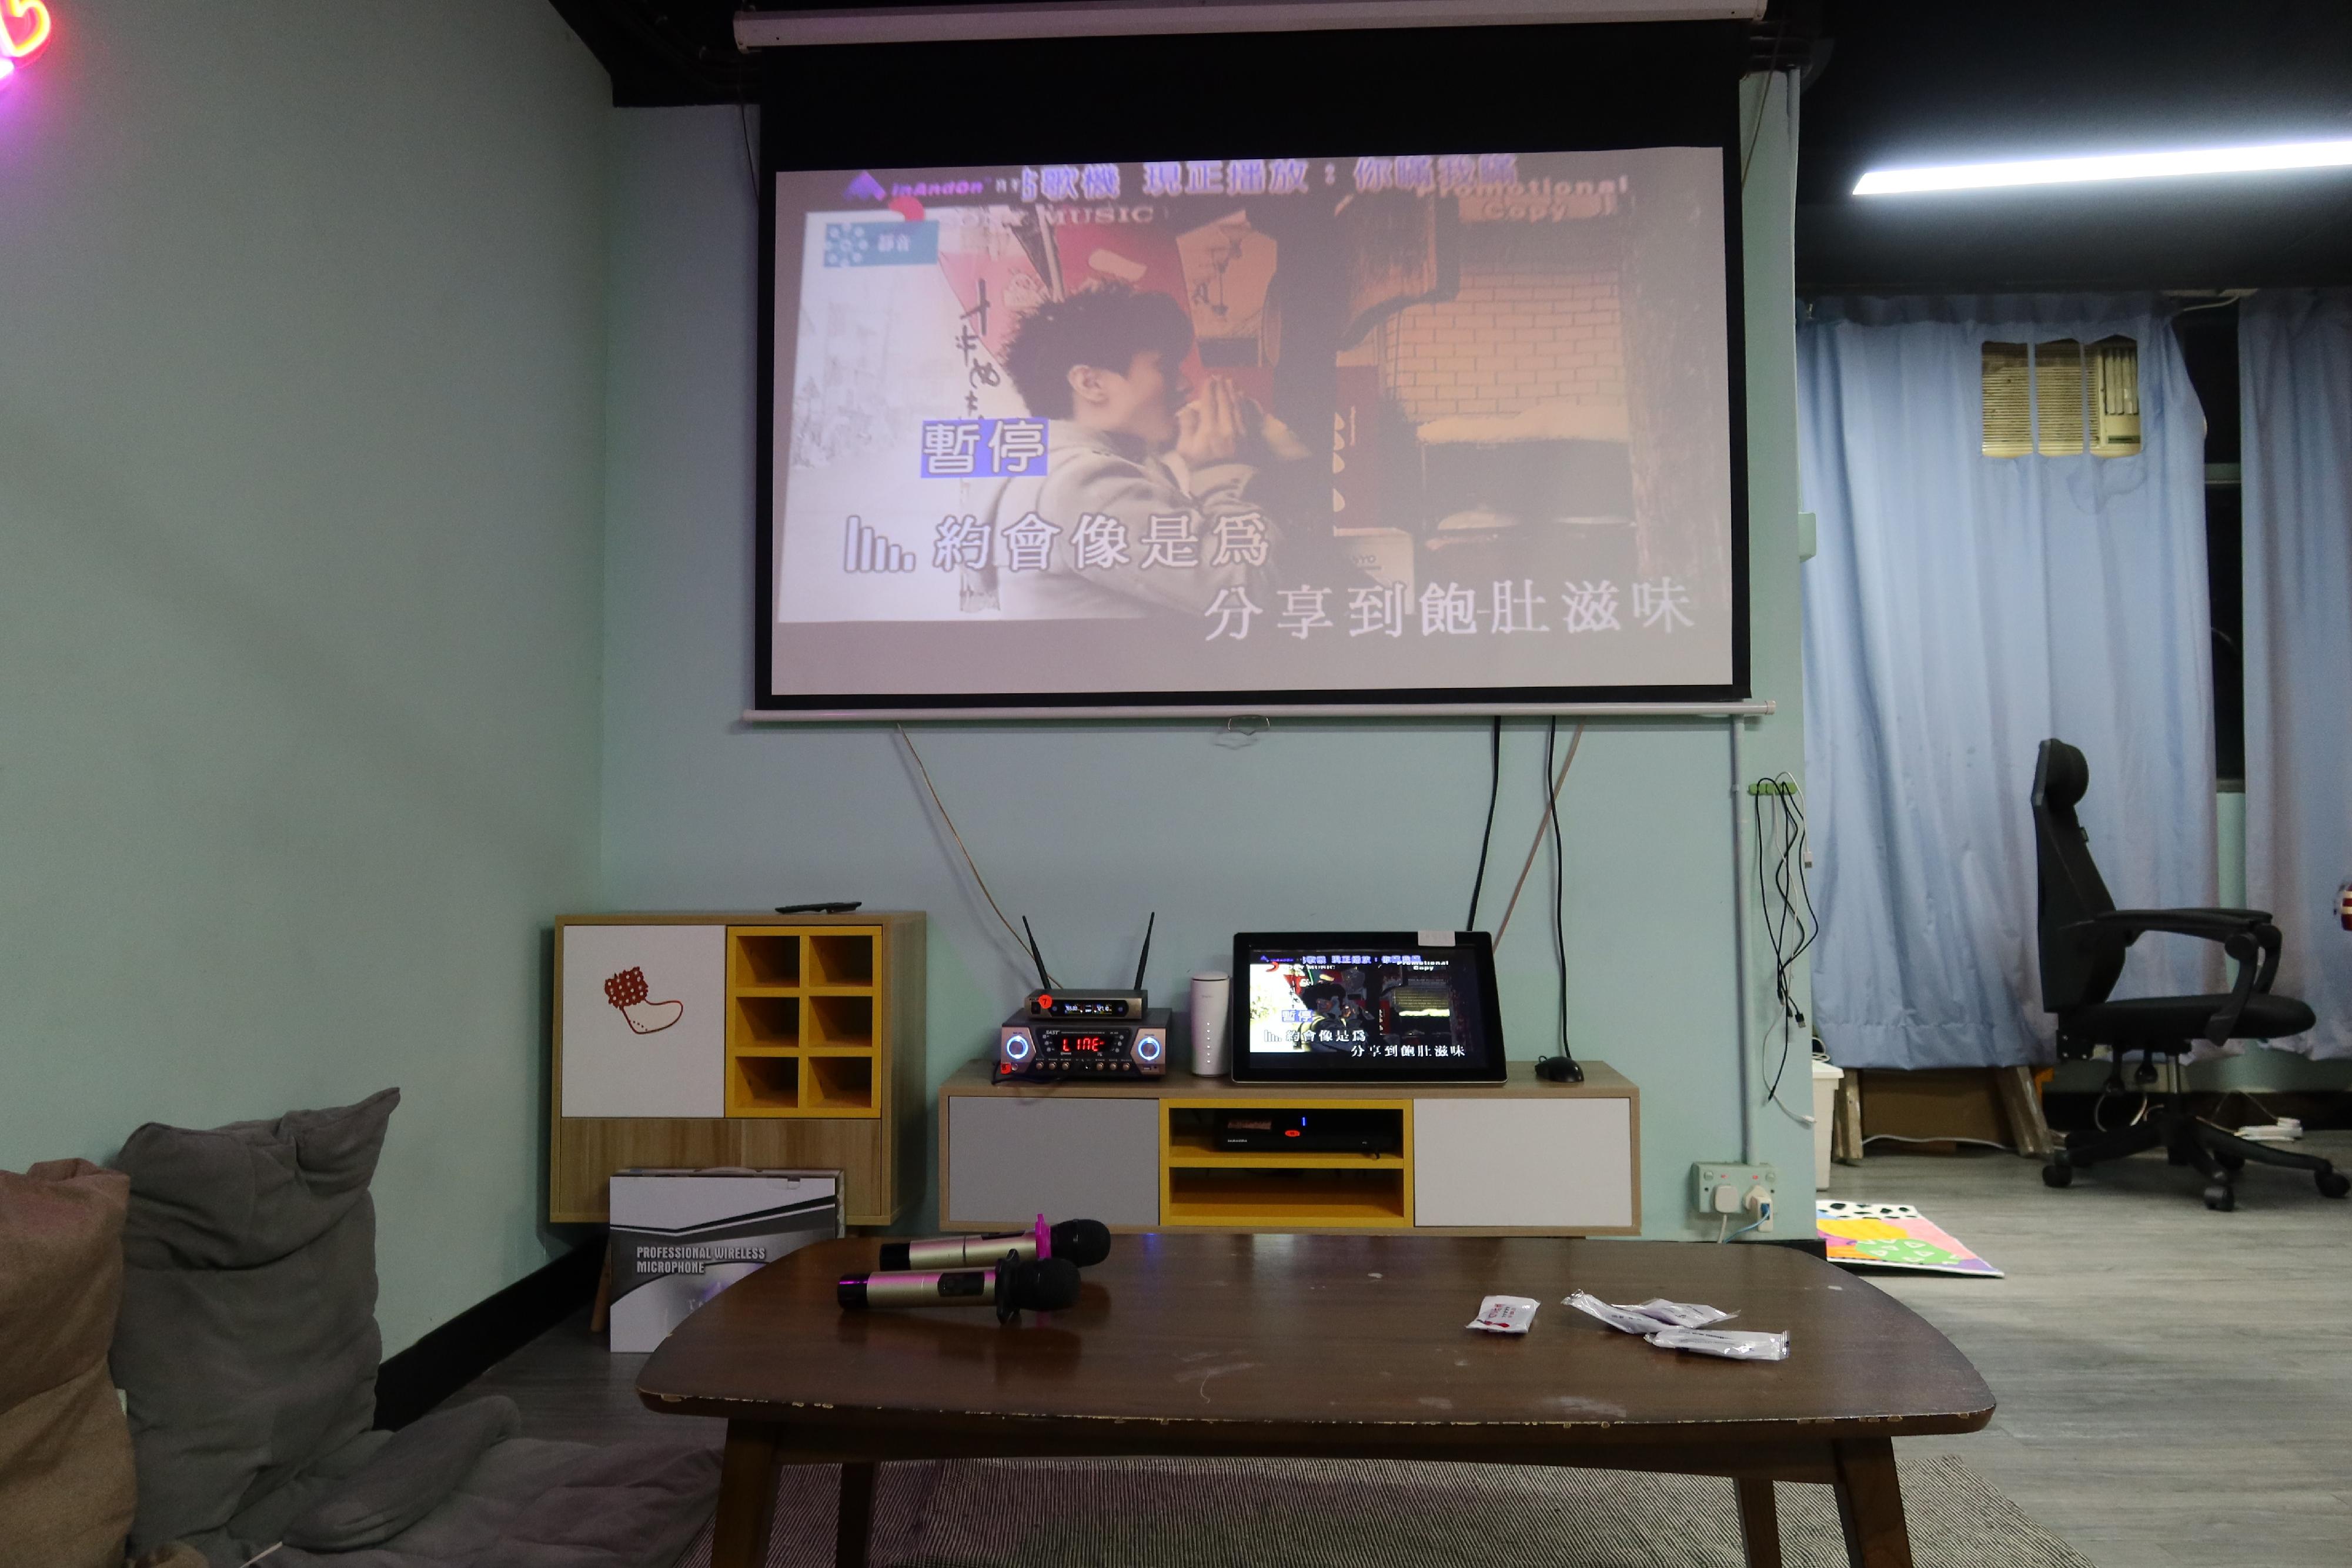 Hong Kong Customs yesterday (September 14) conducted an enforcement operation codenamed "Magpie" throughout the city to combat illegal activities involving party room operators providing infringing karaoke songs to customers in the course of business. Photo shows a party room in Tsuen Wan raided by Customs officers.